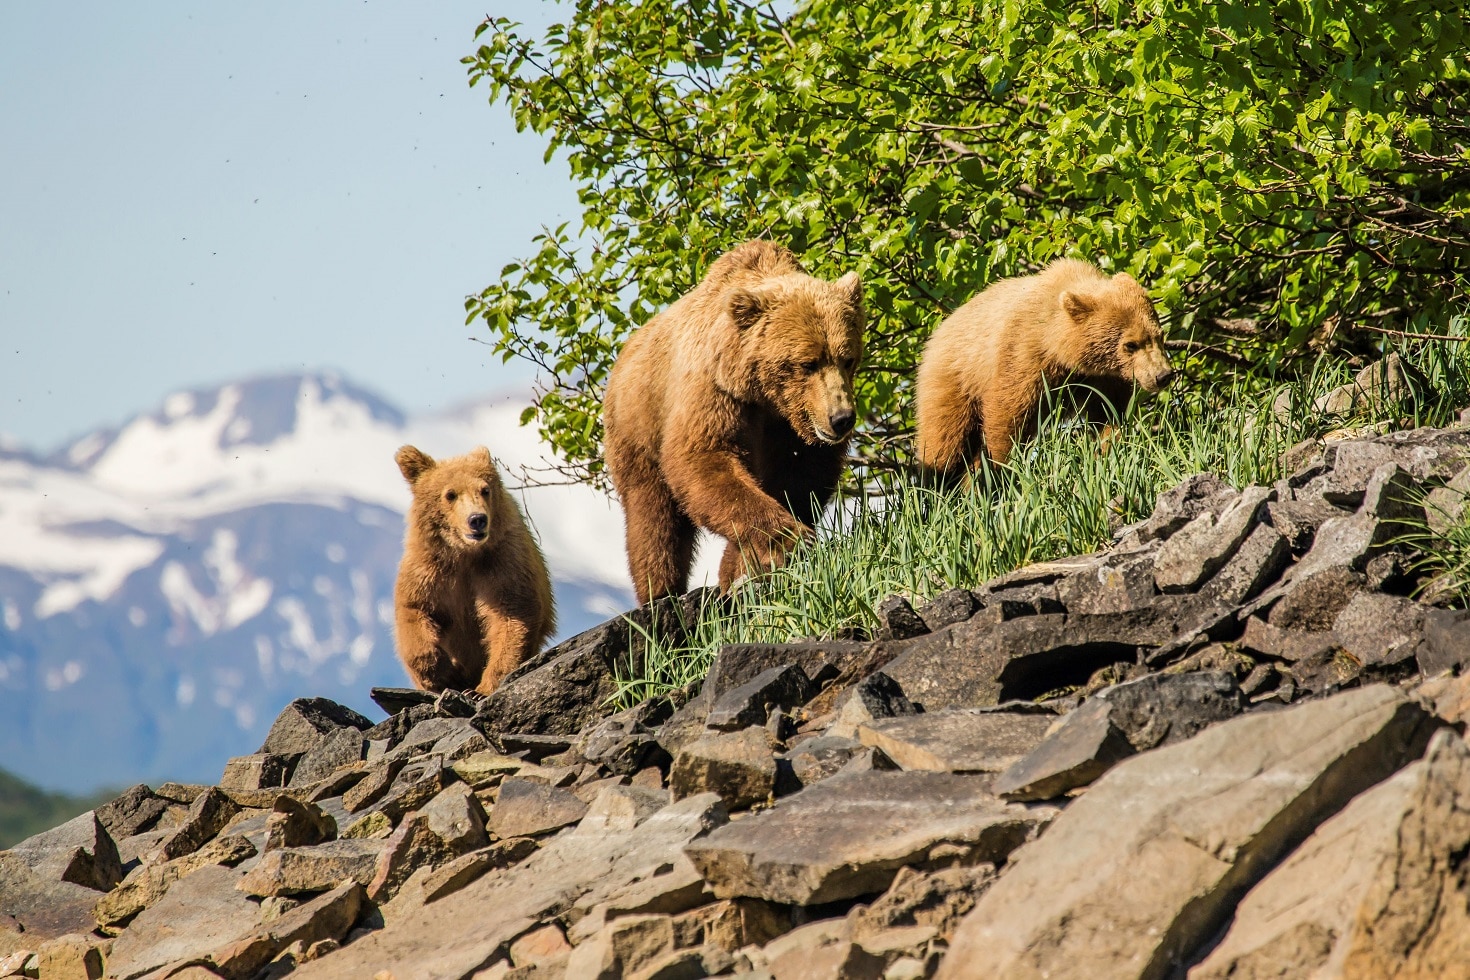 mother bear and two cubs climbing on rocks trees on the right and mountains in the back